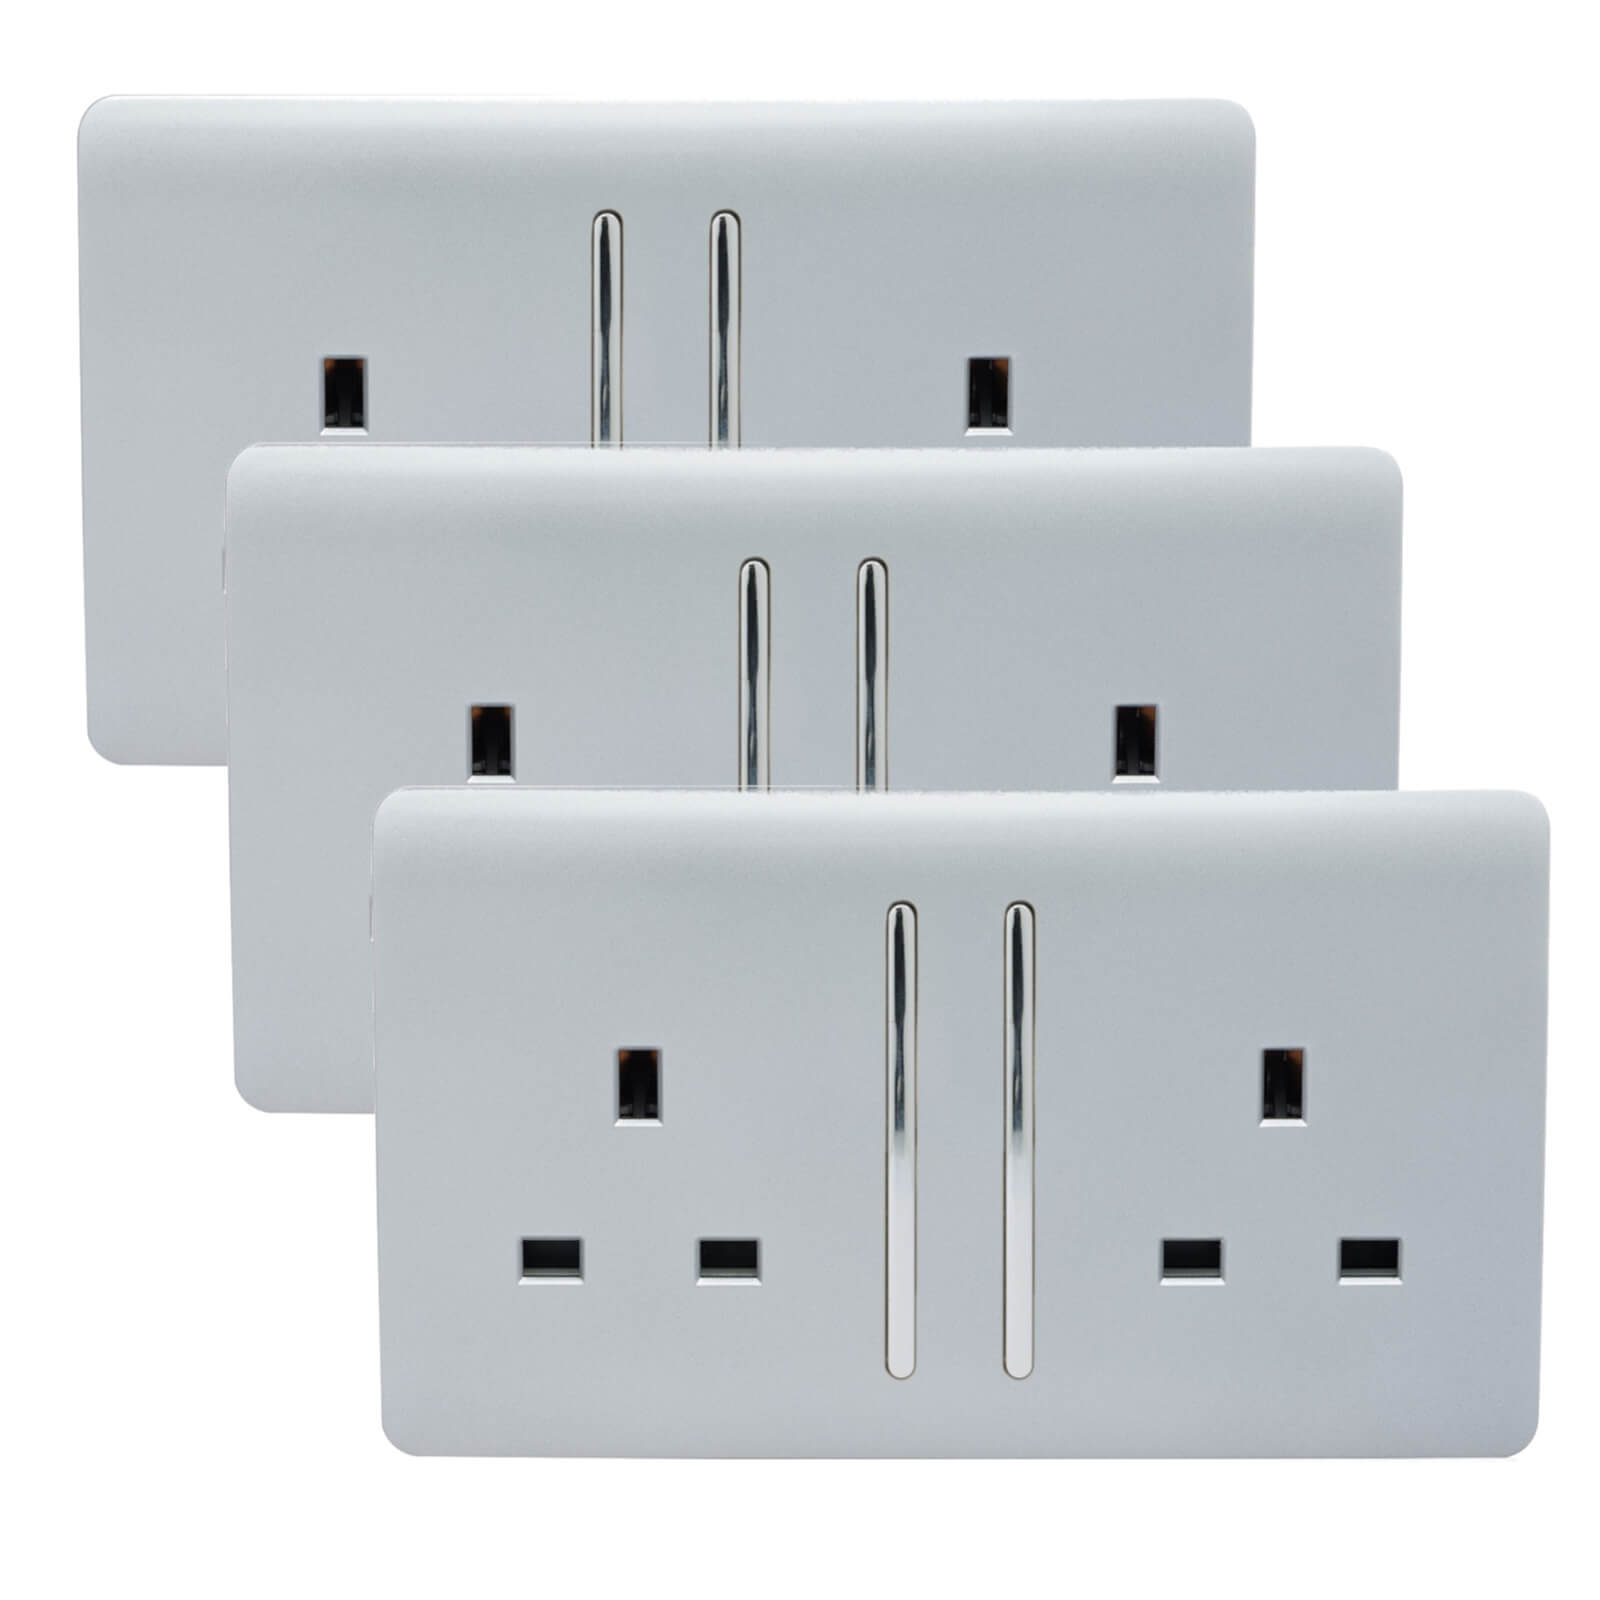 Trendi Switch 2 Gang 13 amp long switched Plug Socket in Screwless Silver (3 Pack)